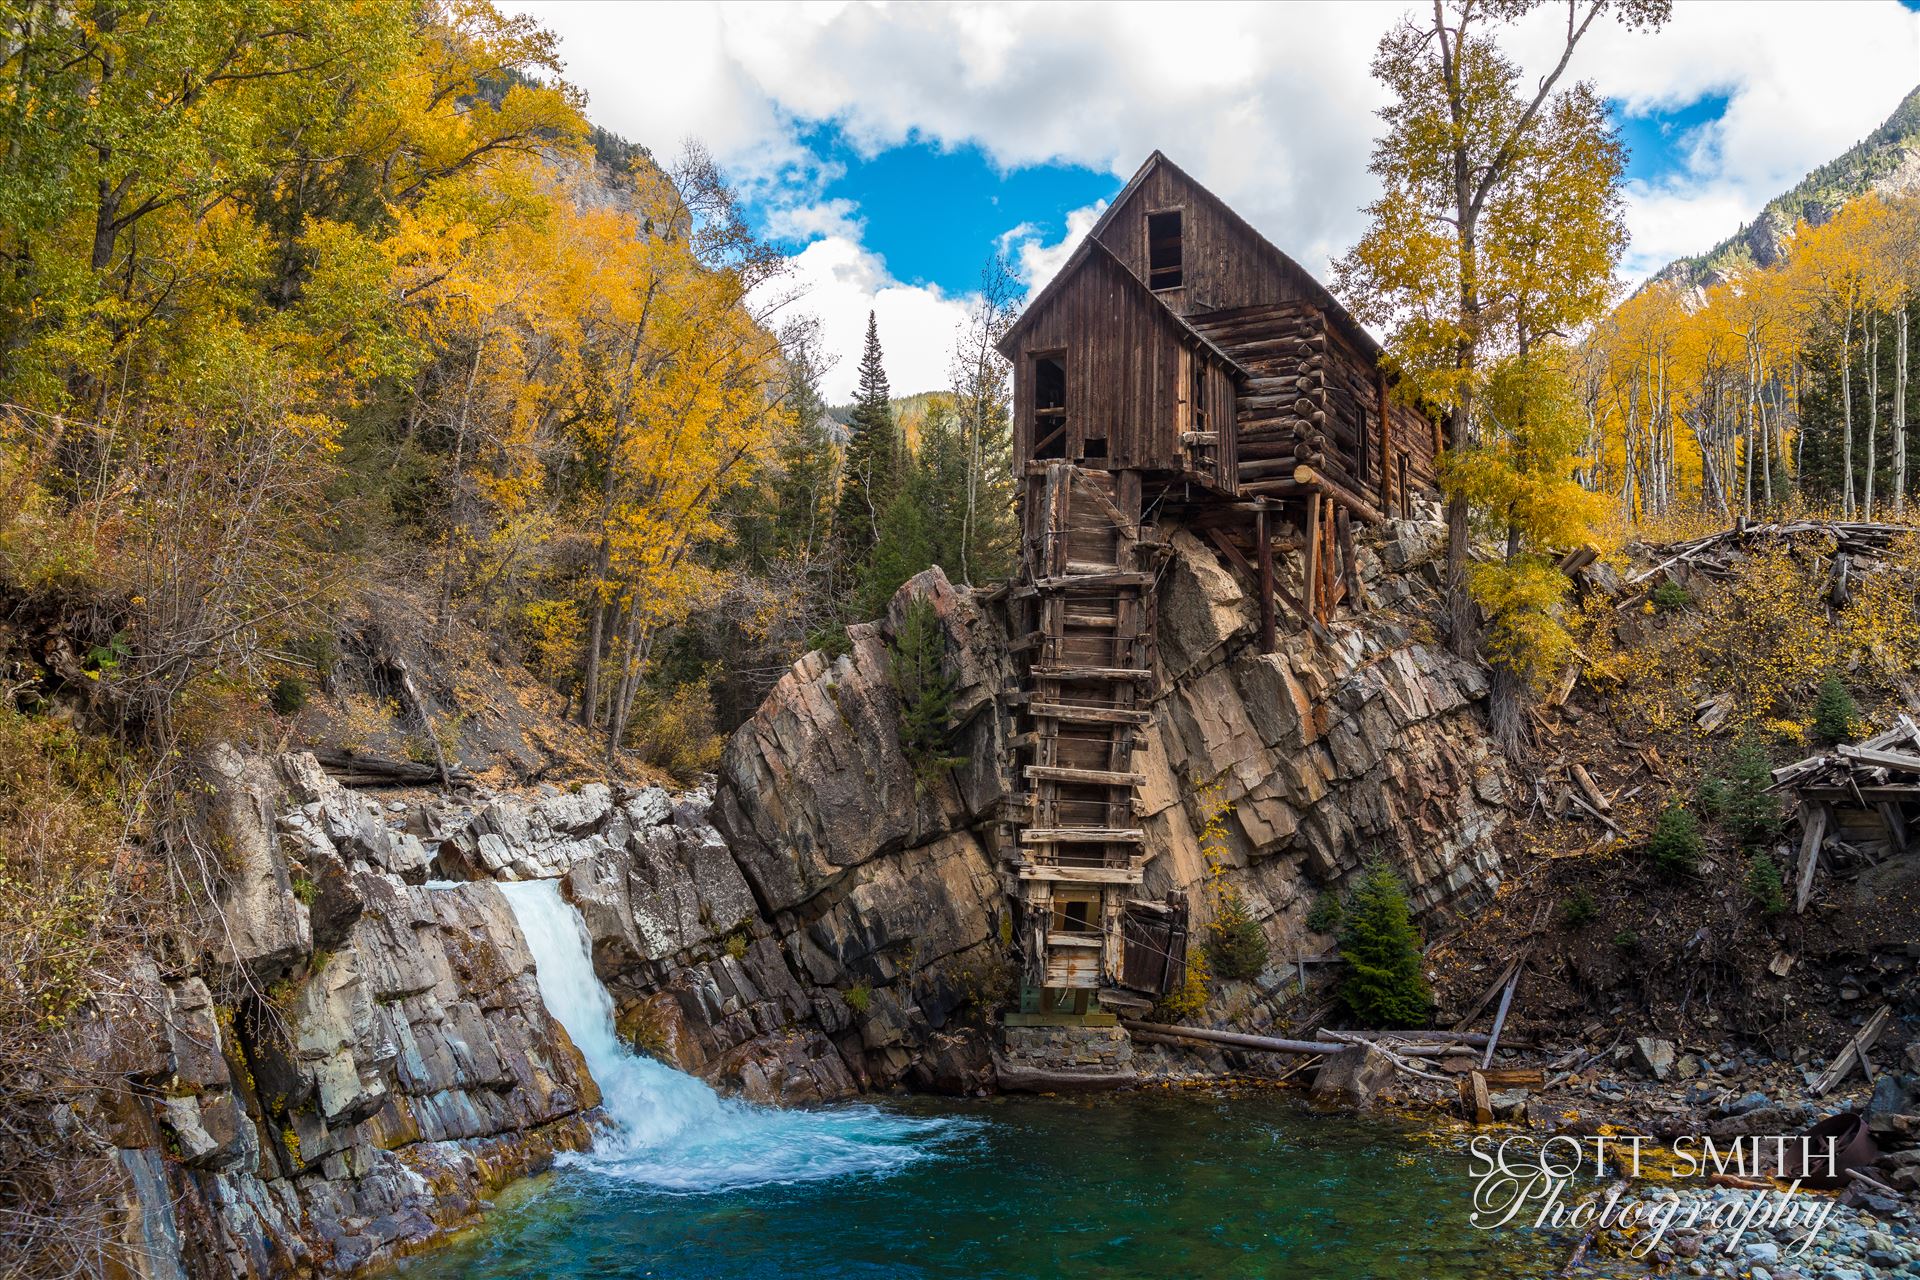 Crystal Mill, Colorado 03 - The Crystal Mill, or the Old Mill is an 1892 wooden powerhouse located on an outcrop above the Crystal River in Crystal, Colorado by Scott Smith Photos